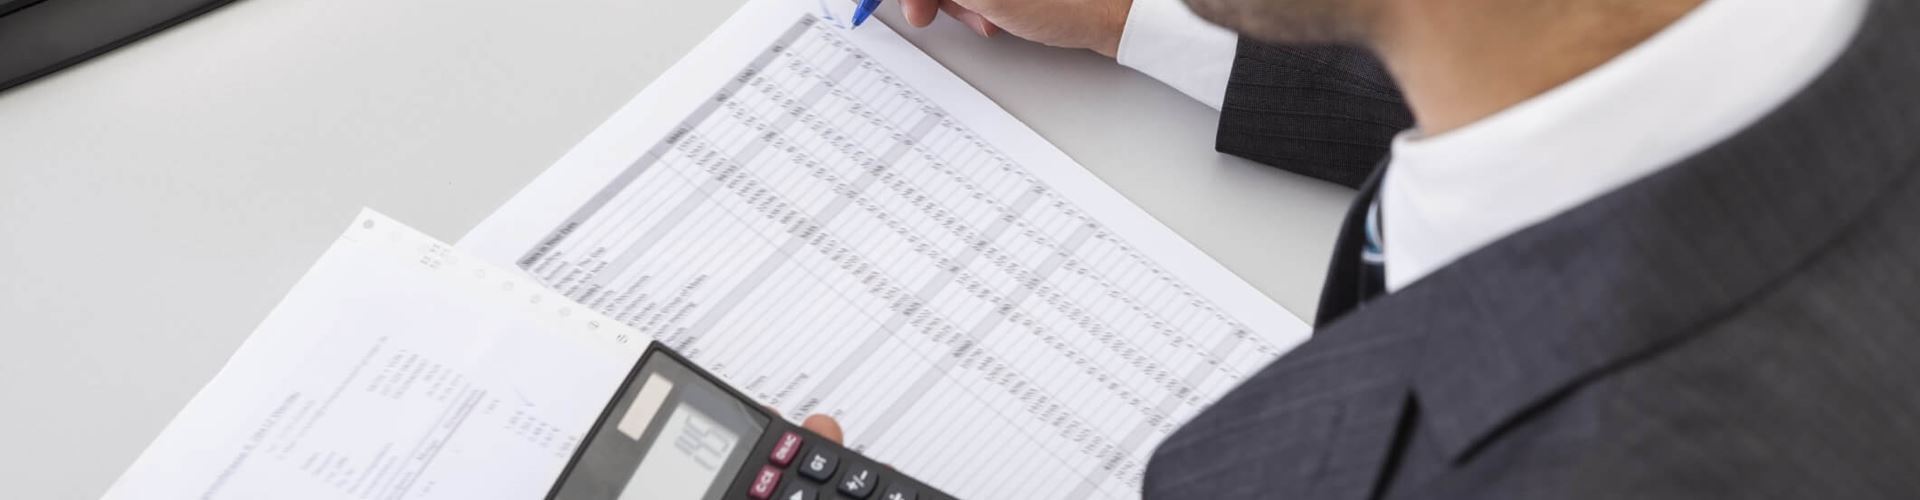 What to expect from a career in accountancy